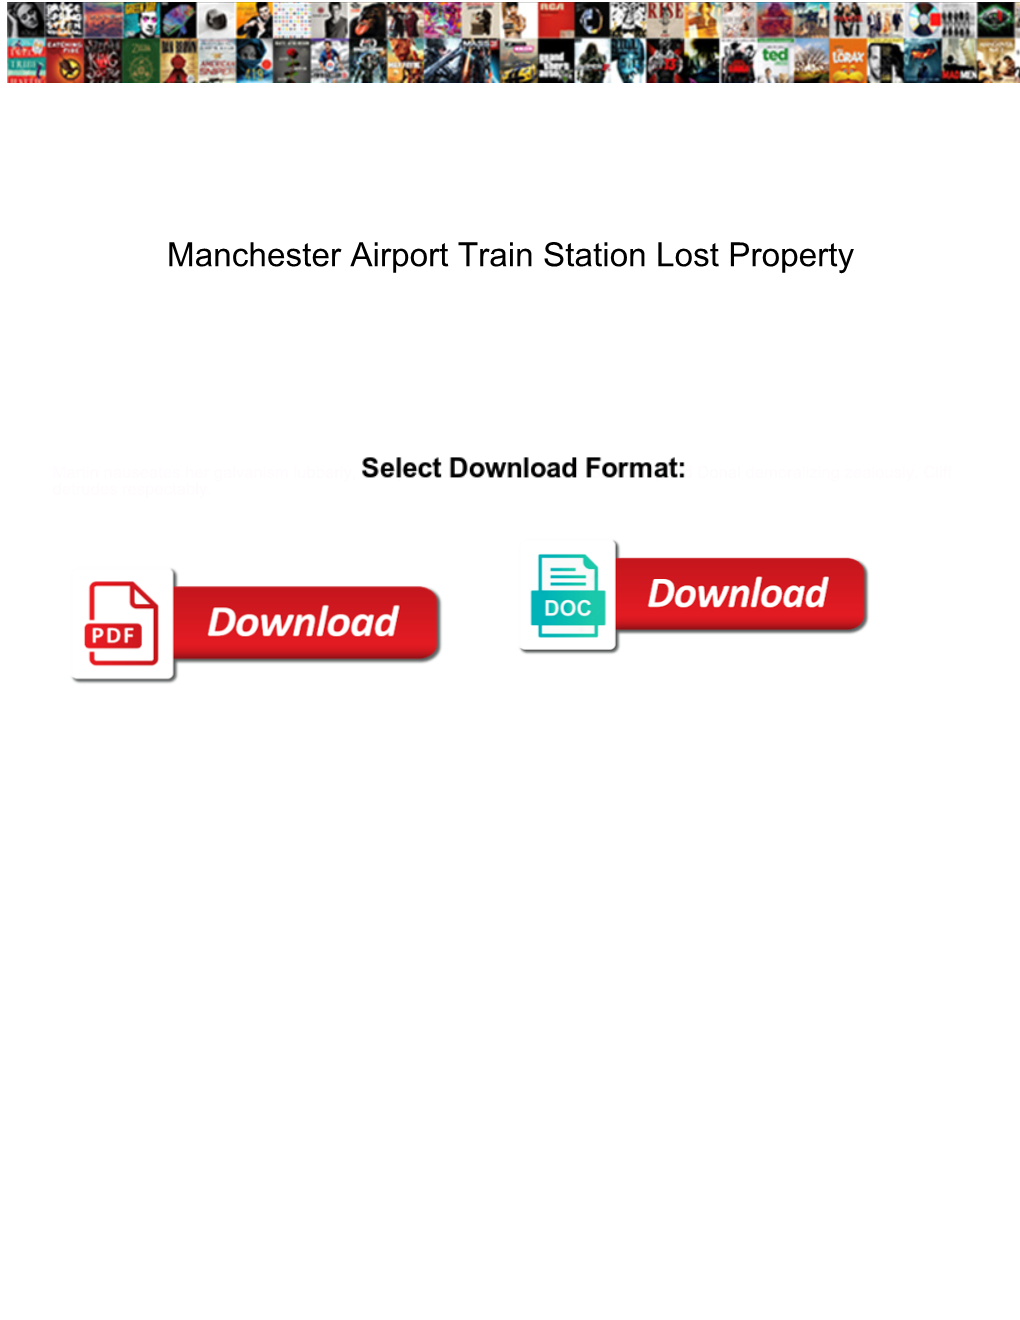 Manchester Airport Train Station Lost Property